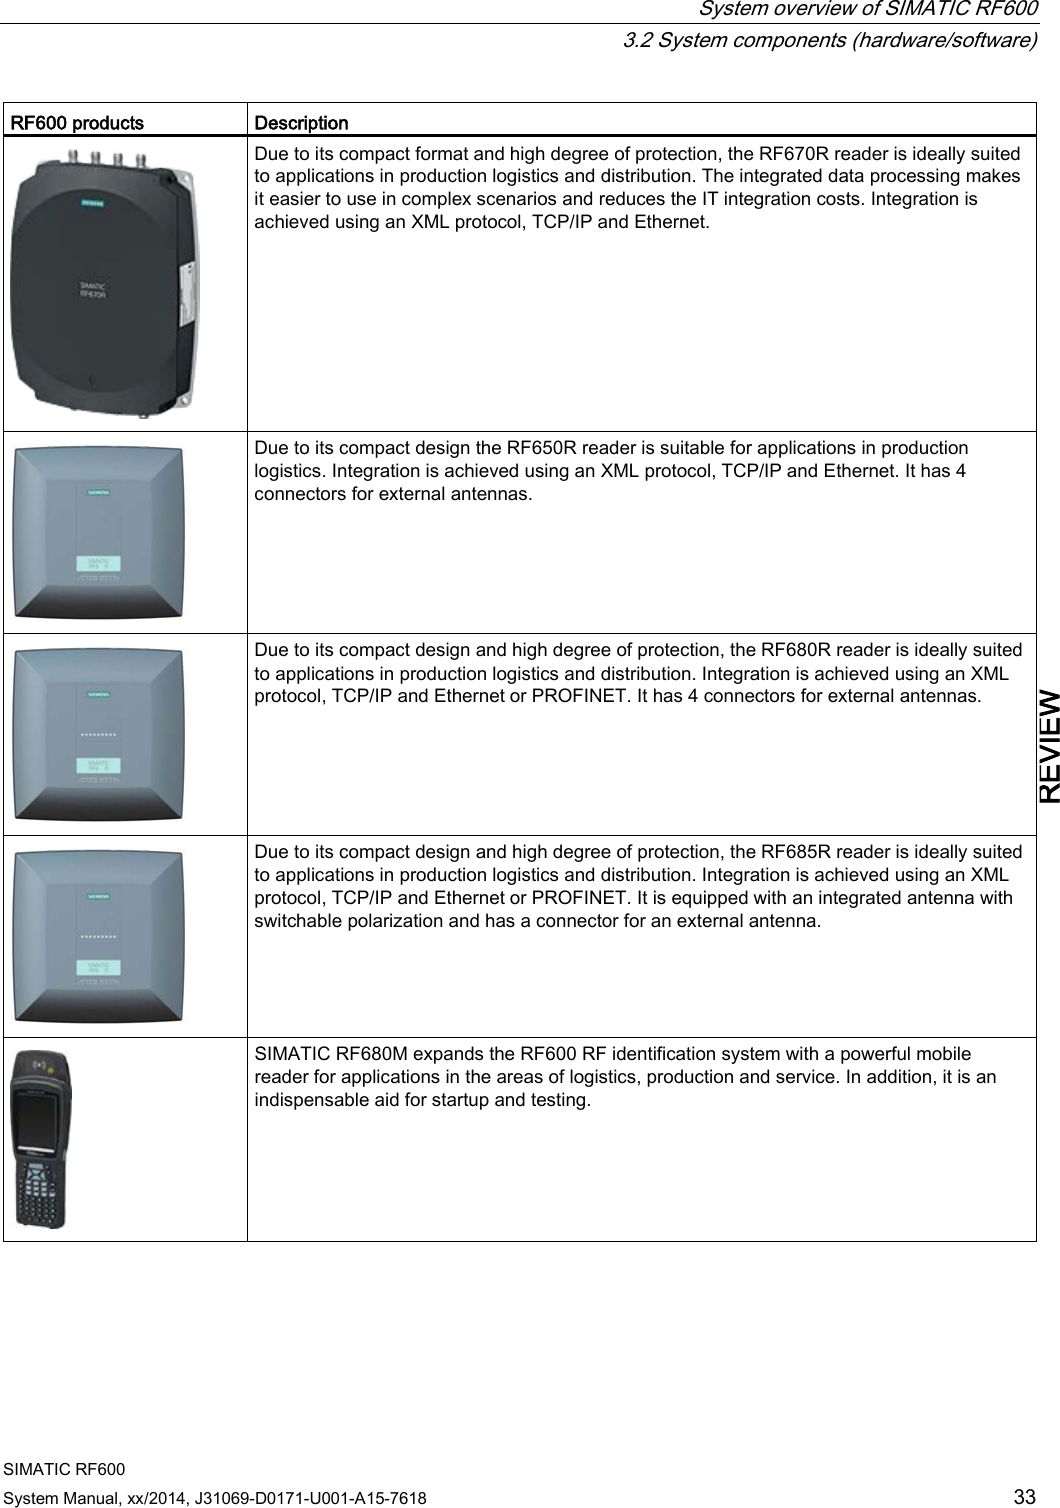  System overview of SIMATIC RF600  3.2 System components (hardware/software) SIMATIC RF600 System Manual, xx/2014, J31069-D0171-U001-A15-7618 33 REVIEW RF600 products Description  Due to its compact format and high degree of protection, the RF670R reader is ideally suited to applications in production logistics and distribution. The integrated data processing makes it easier to use in complex scenarios and reduces the IT integration costs. Integration is achieved using an XML protocol, TCP/IP and Ethernet.   Due to its compact design the RF650R reader is suitable for applications in production logistics. Integration is achieved using an XML protocol, TCP/IP and Ethernet. It has 4 connectors for external antennas.  Due to its compact design and high degree of protection, the RF680R reader is ideally suited to applications in production logistics and distribution. Integration is achieved using an XML protocol, TCP/IP and Ethernet or PROFINET. It has 4 connectors for external antennas.  Due to its compact design and high degree of protection, the RF685R reader is ideally suited to applications in production logistics and distribution. Integration is achieved using an XML protocol, TCP/IP and Ethernet or PROFINET. It is equipped with an integrated antenna with switchable polarization and has a connector for an external antenna.  SIMATIC RF680M expands the RF600 RF identification system with a powerful mobile reader for applications in the areas of logistics, production and service. In addition, it is an indispensable aid for startup and testing.  